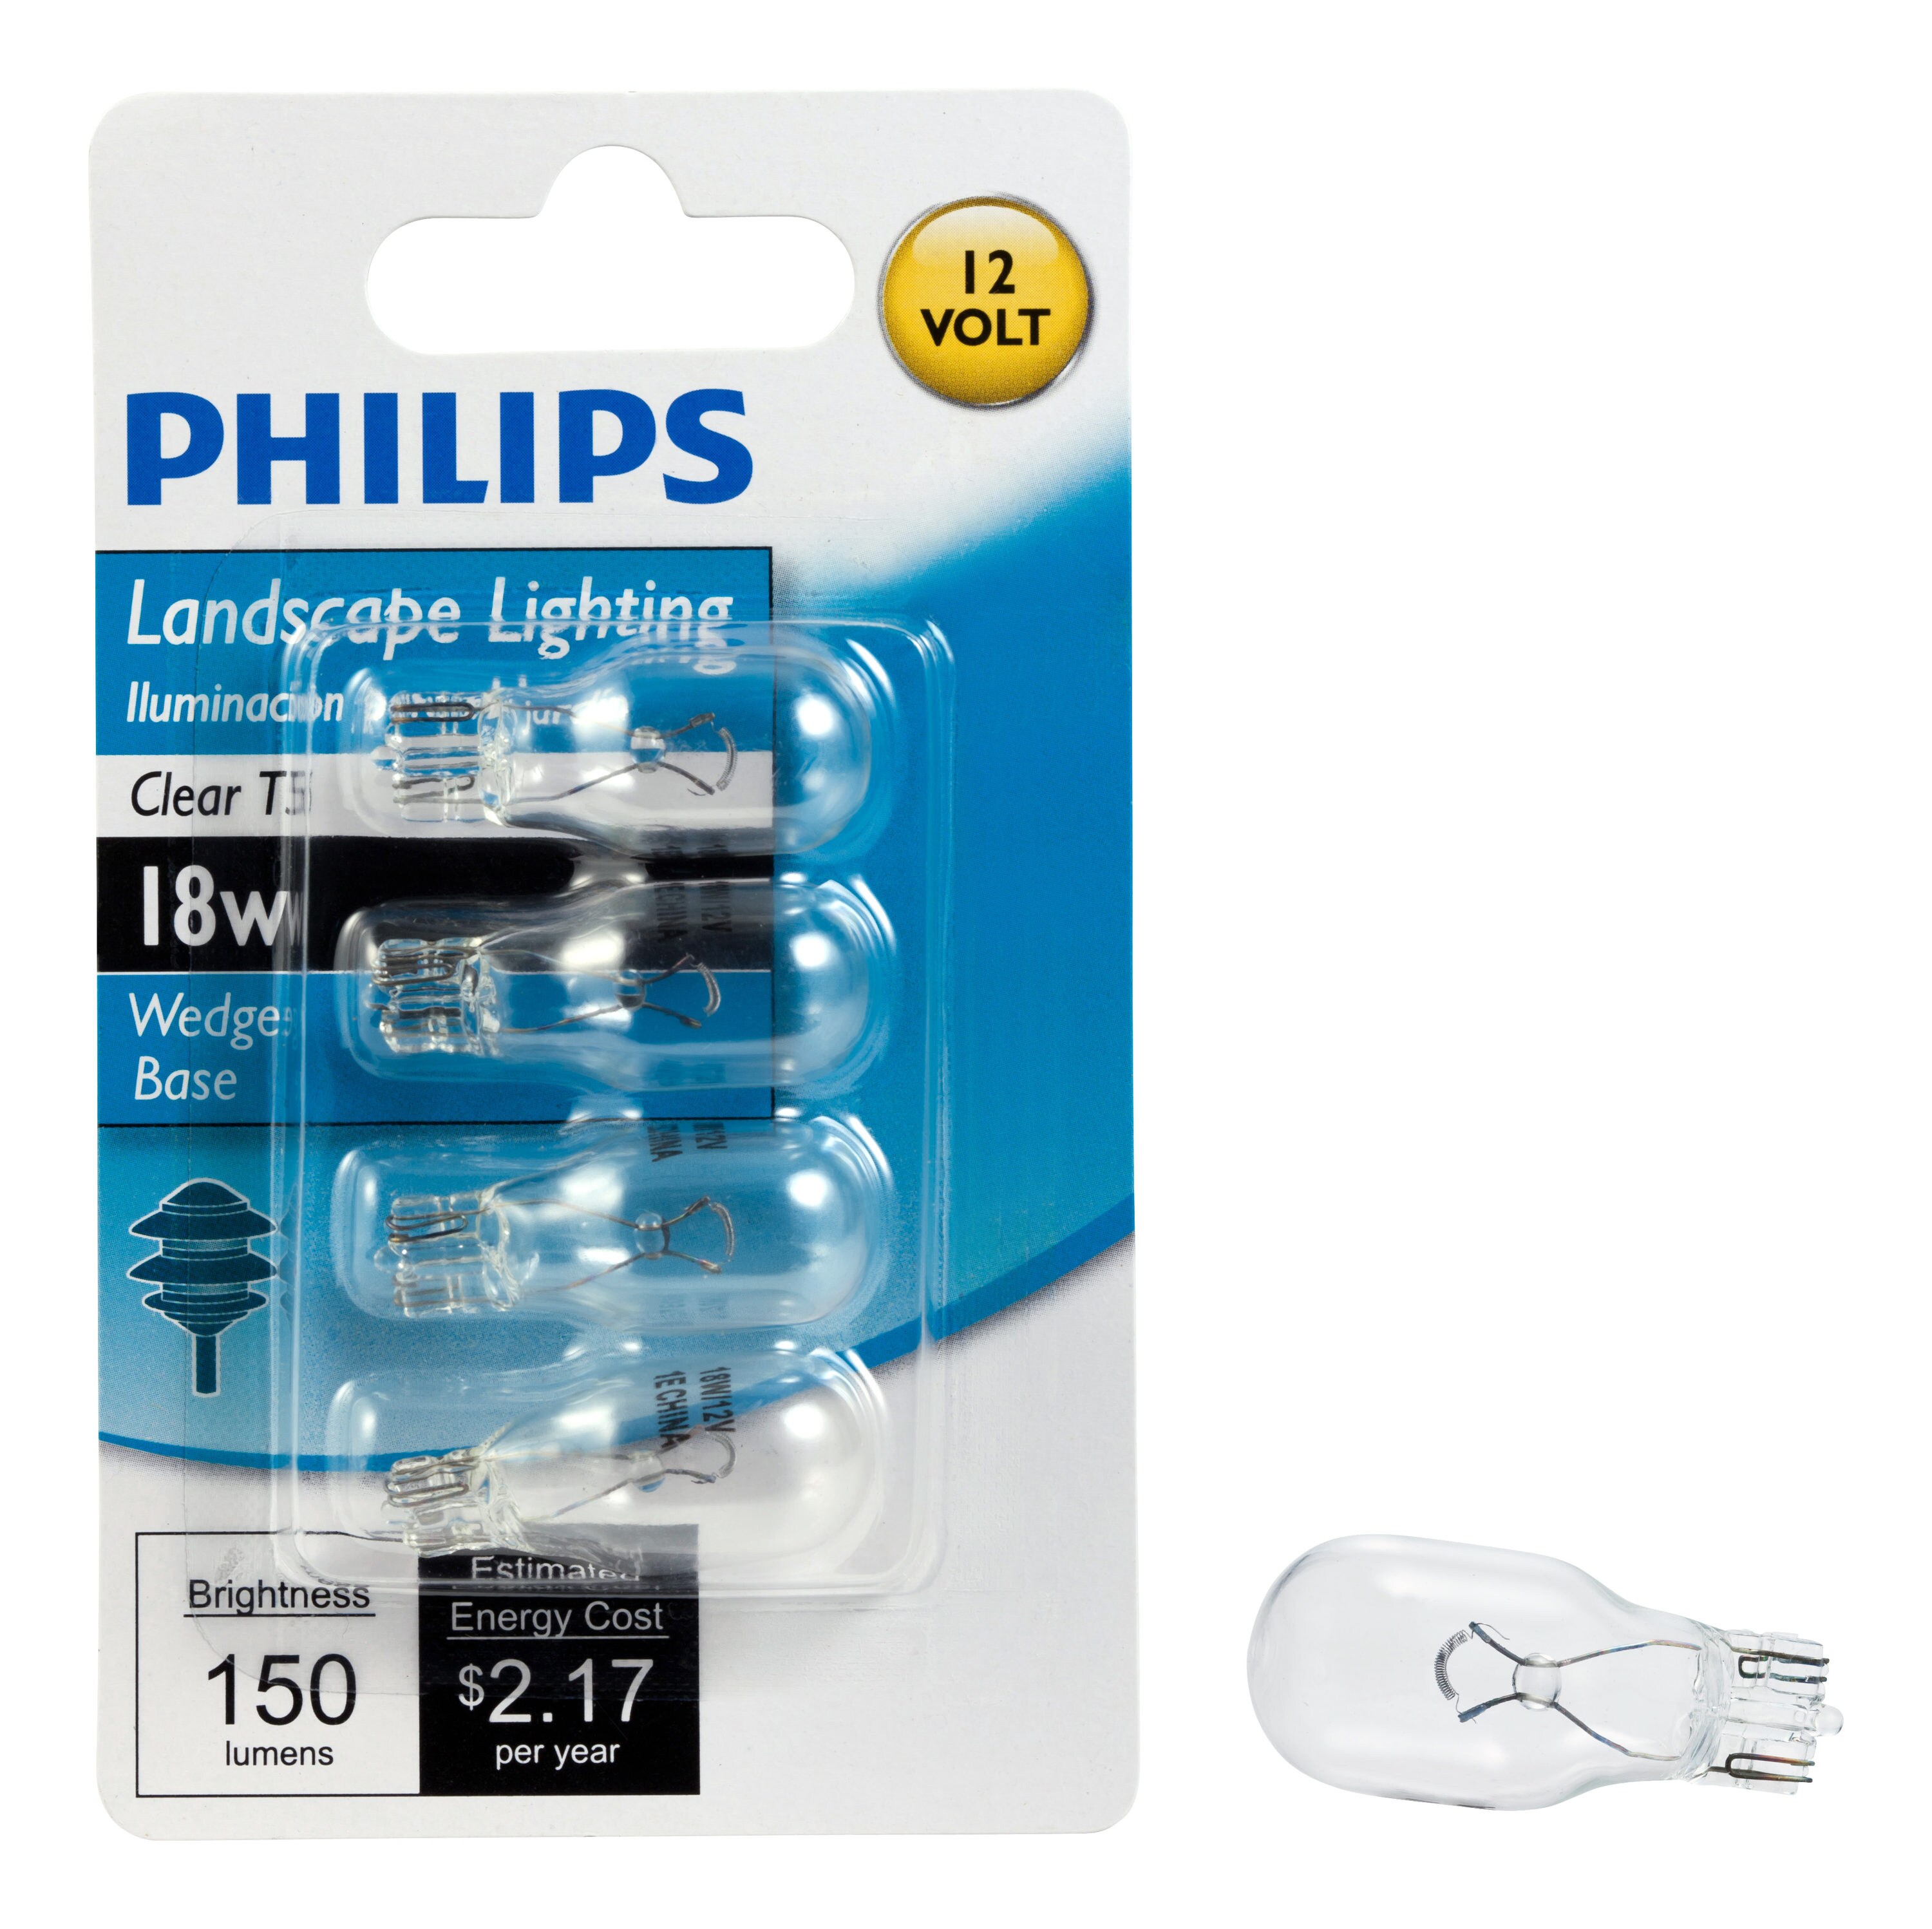 PHILIPS LANDSCAPING LIGHTS 11V 18W 4 IN PACKAGE WEDGE BASE 